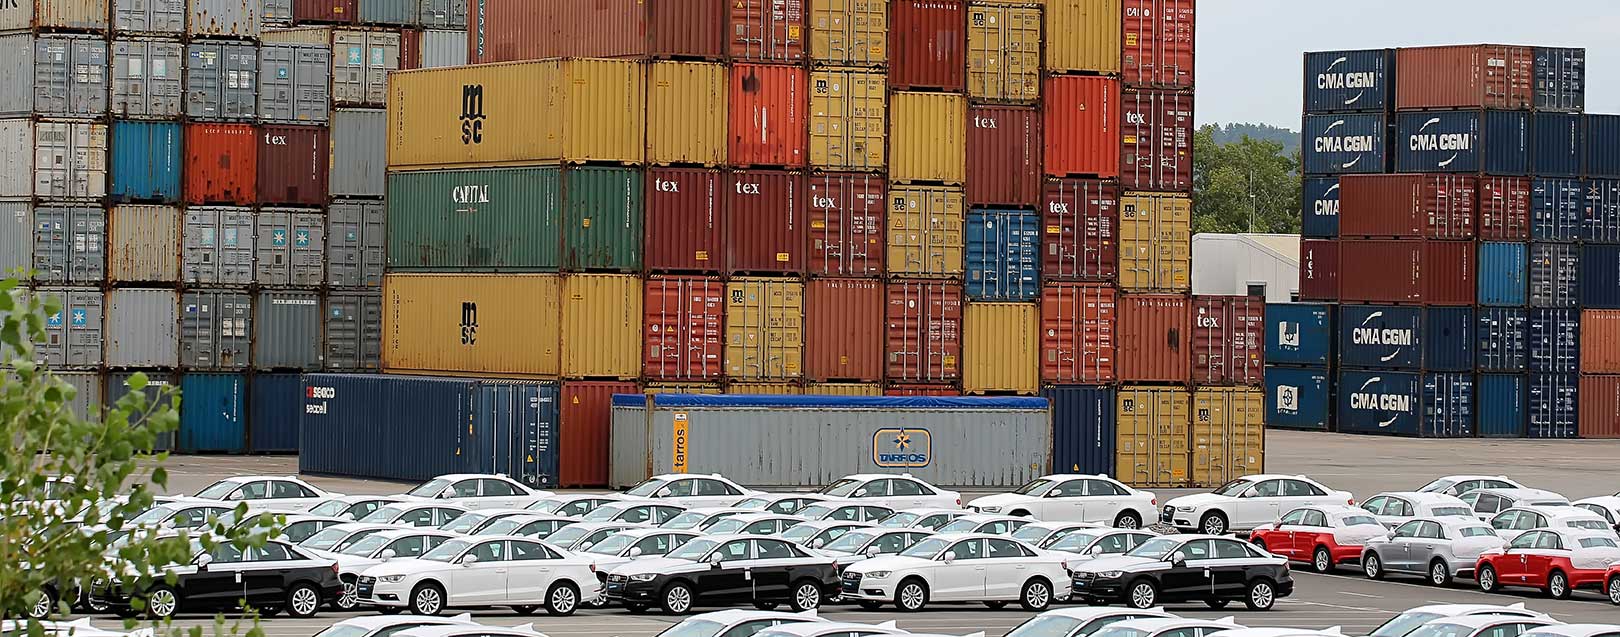 IGST on High Sea Sales taxed only during importation, GST Council